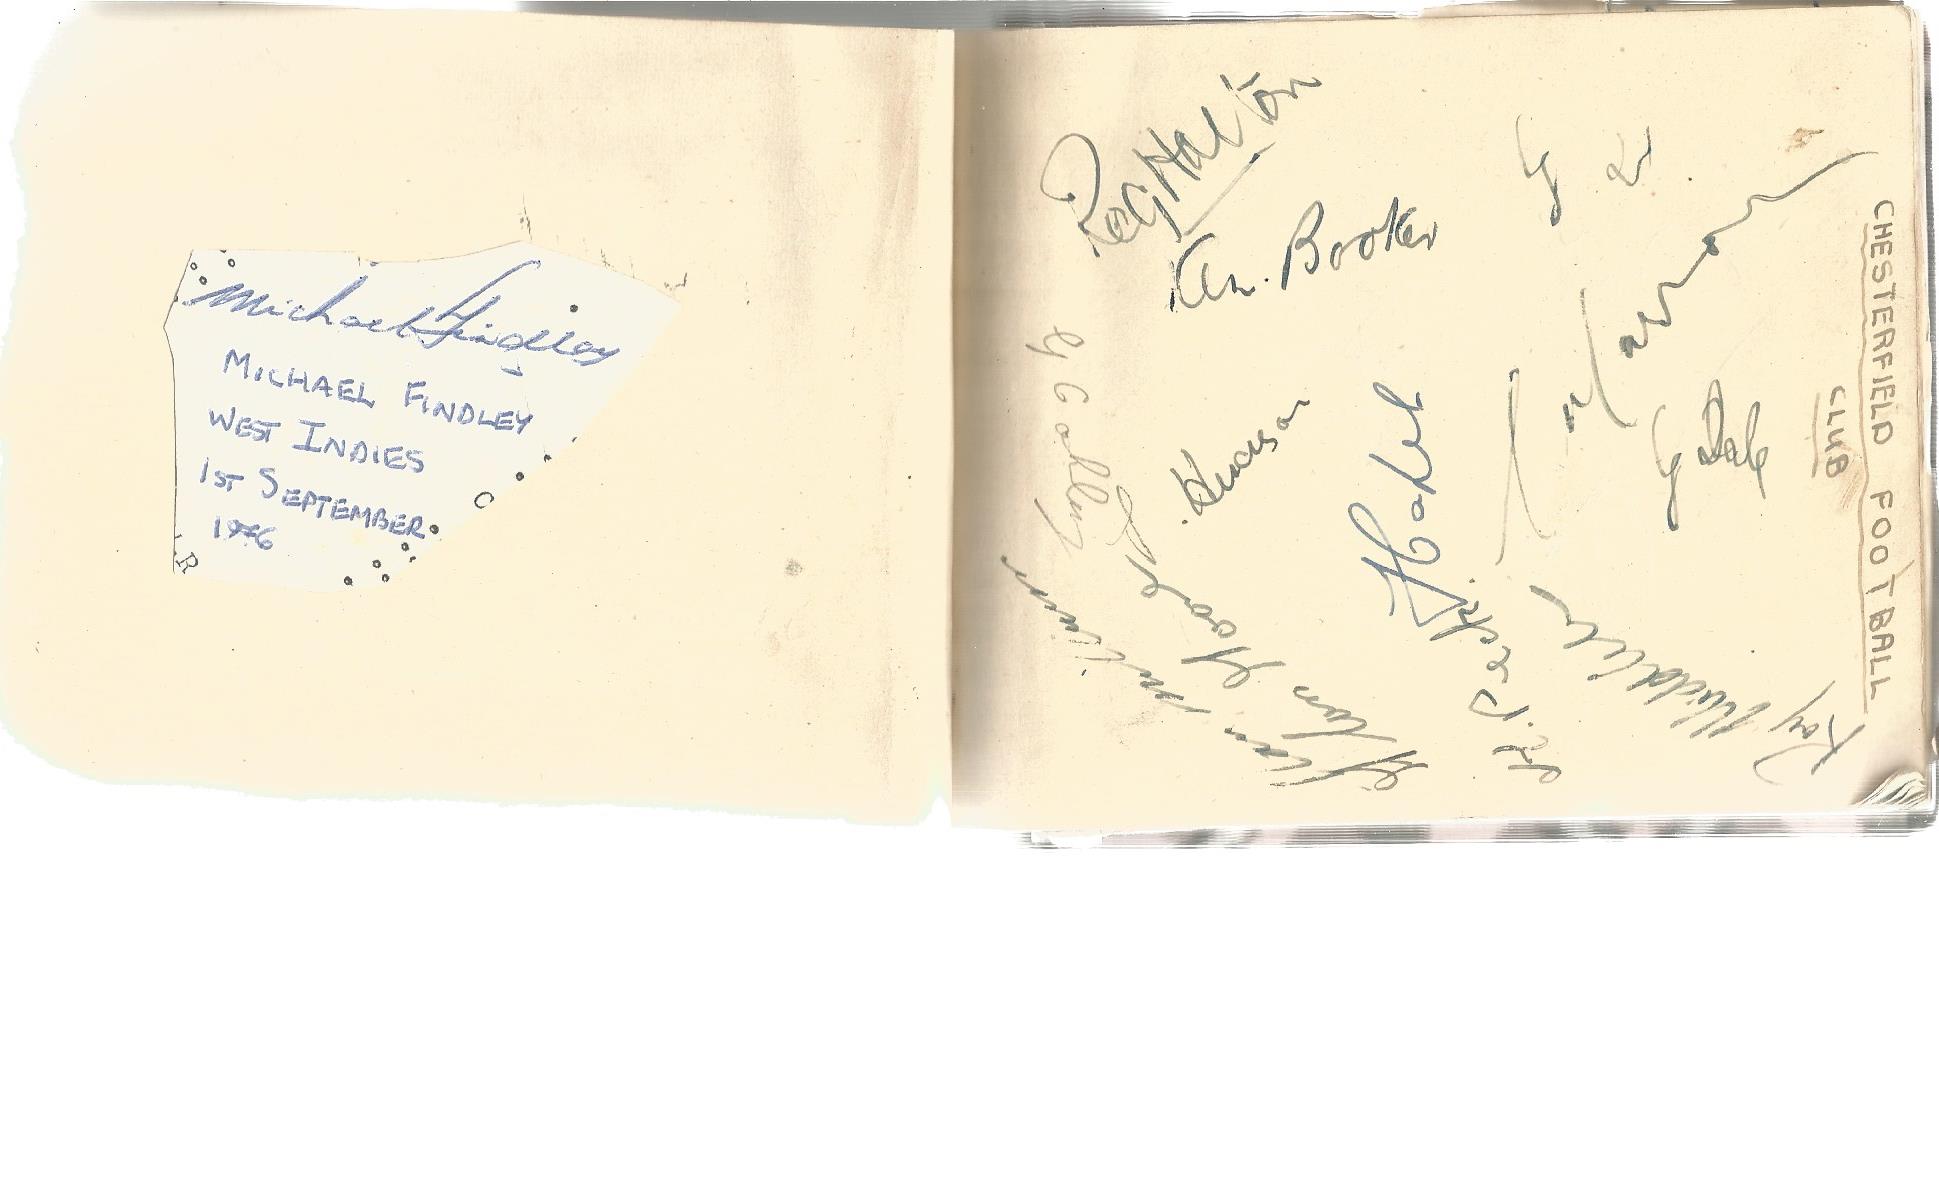 Small cricket autograph book. Many signatures including Collis King, Dereck Murray, Michael Findley, - Image 2 of 6